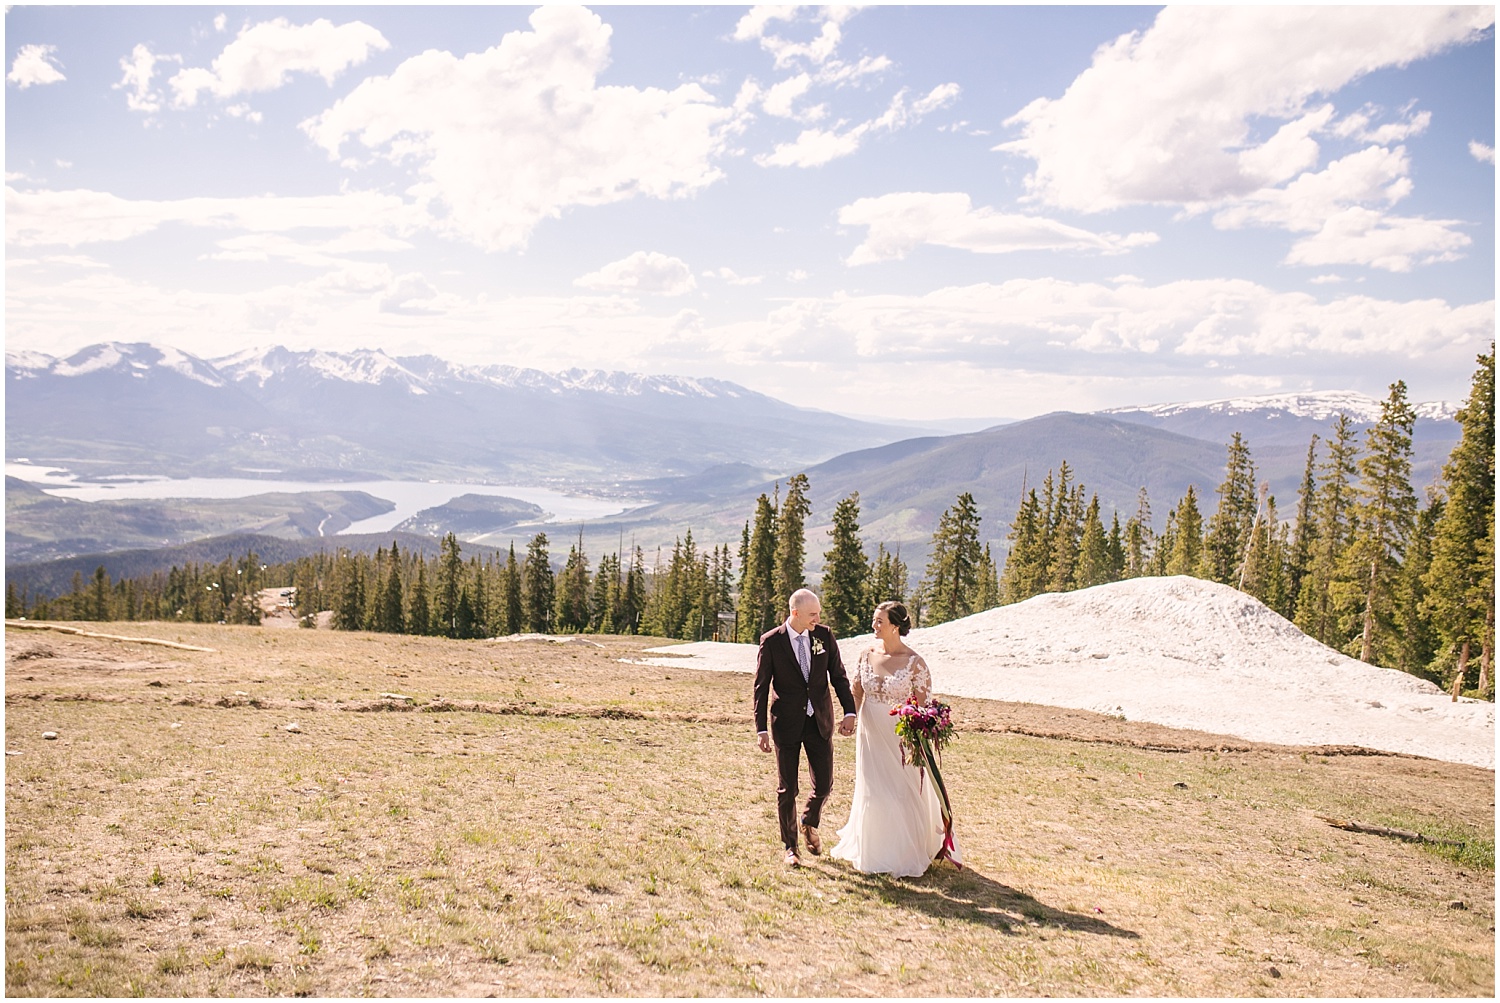 Bride and groom walking in front of sweeping mountain views at the summit of Keystone Colorado